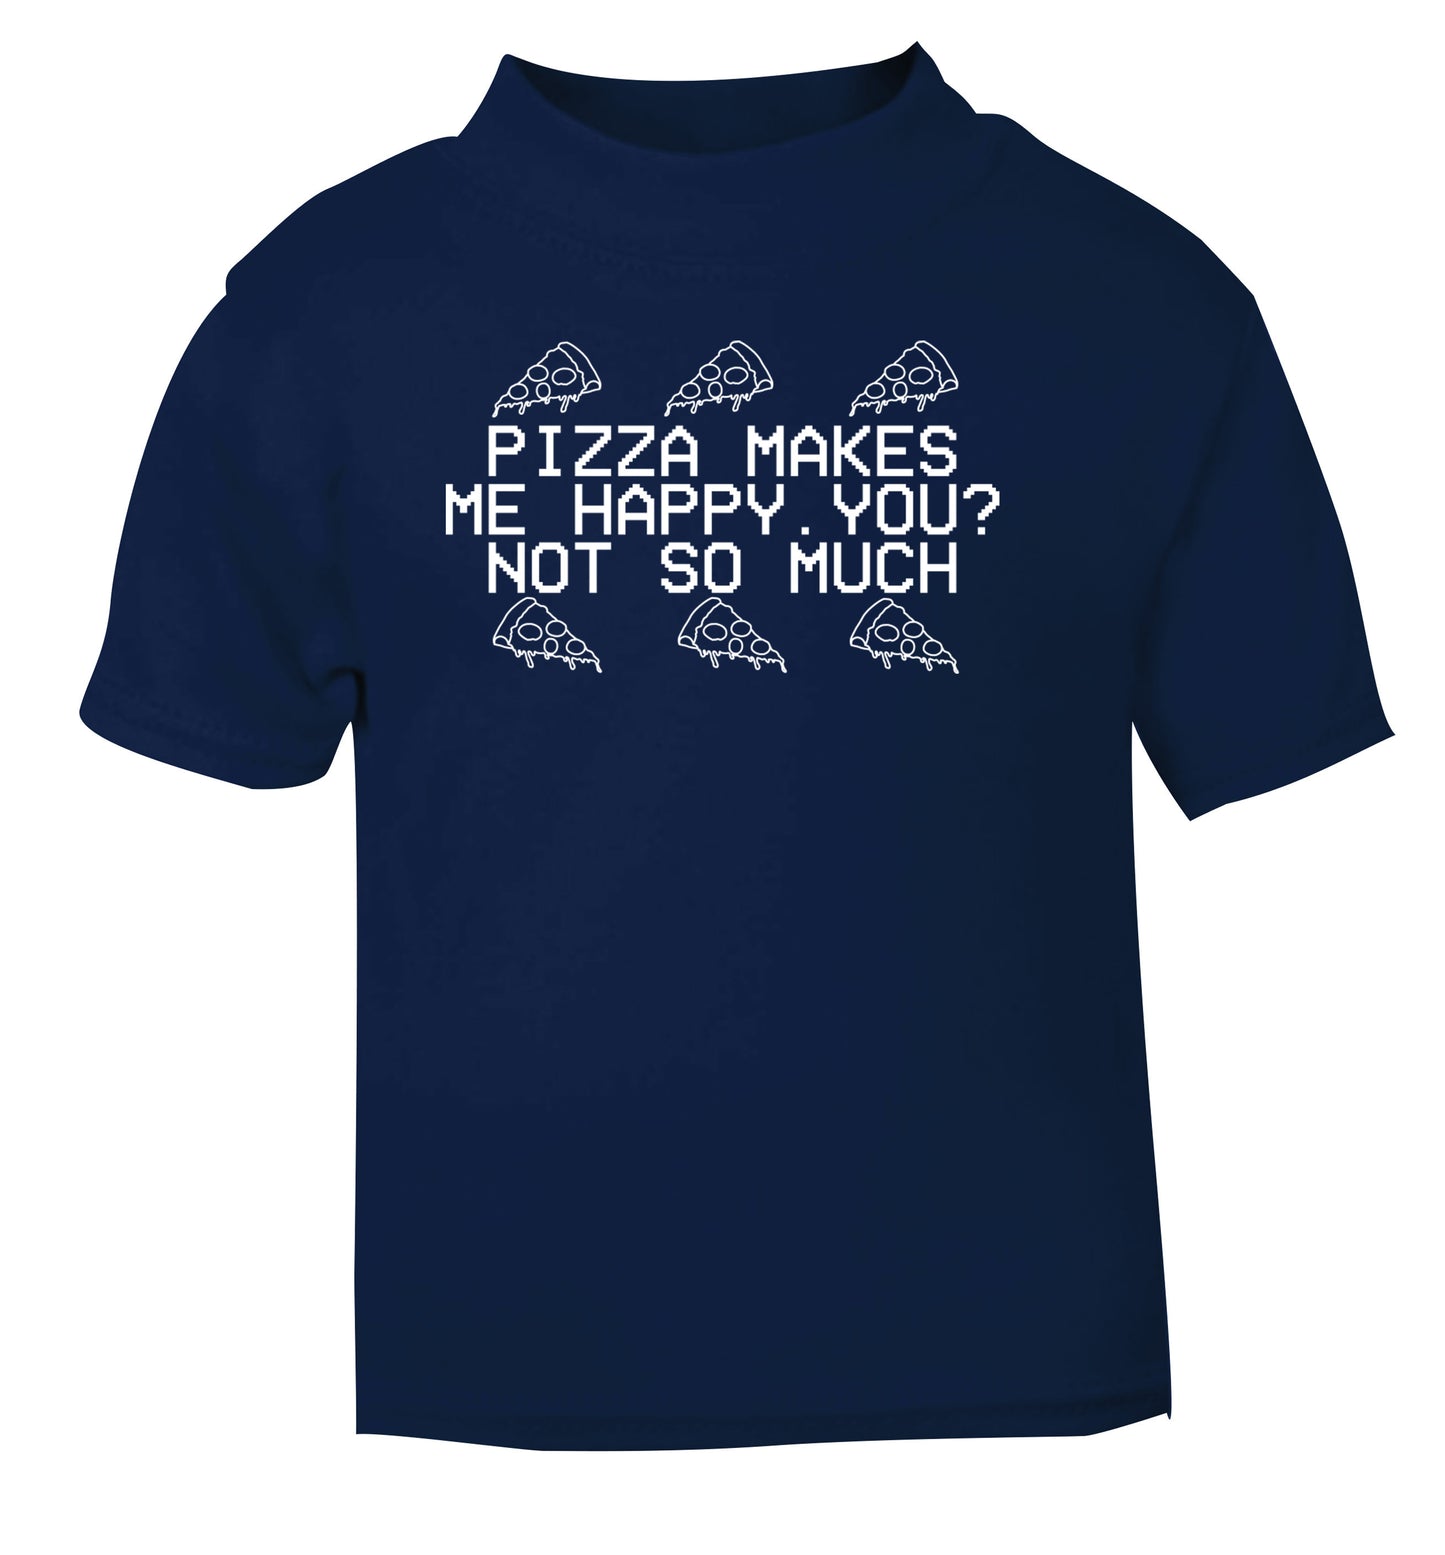 Pizza makes me happy, You? Not so much navy Baby Toddler Tshirt 2 Years